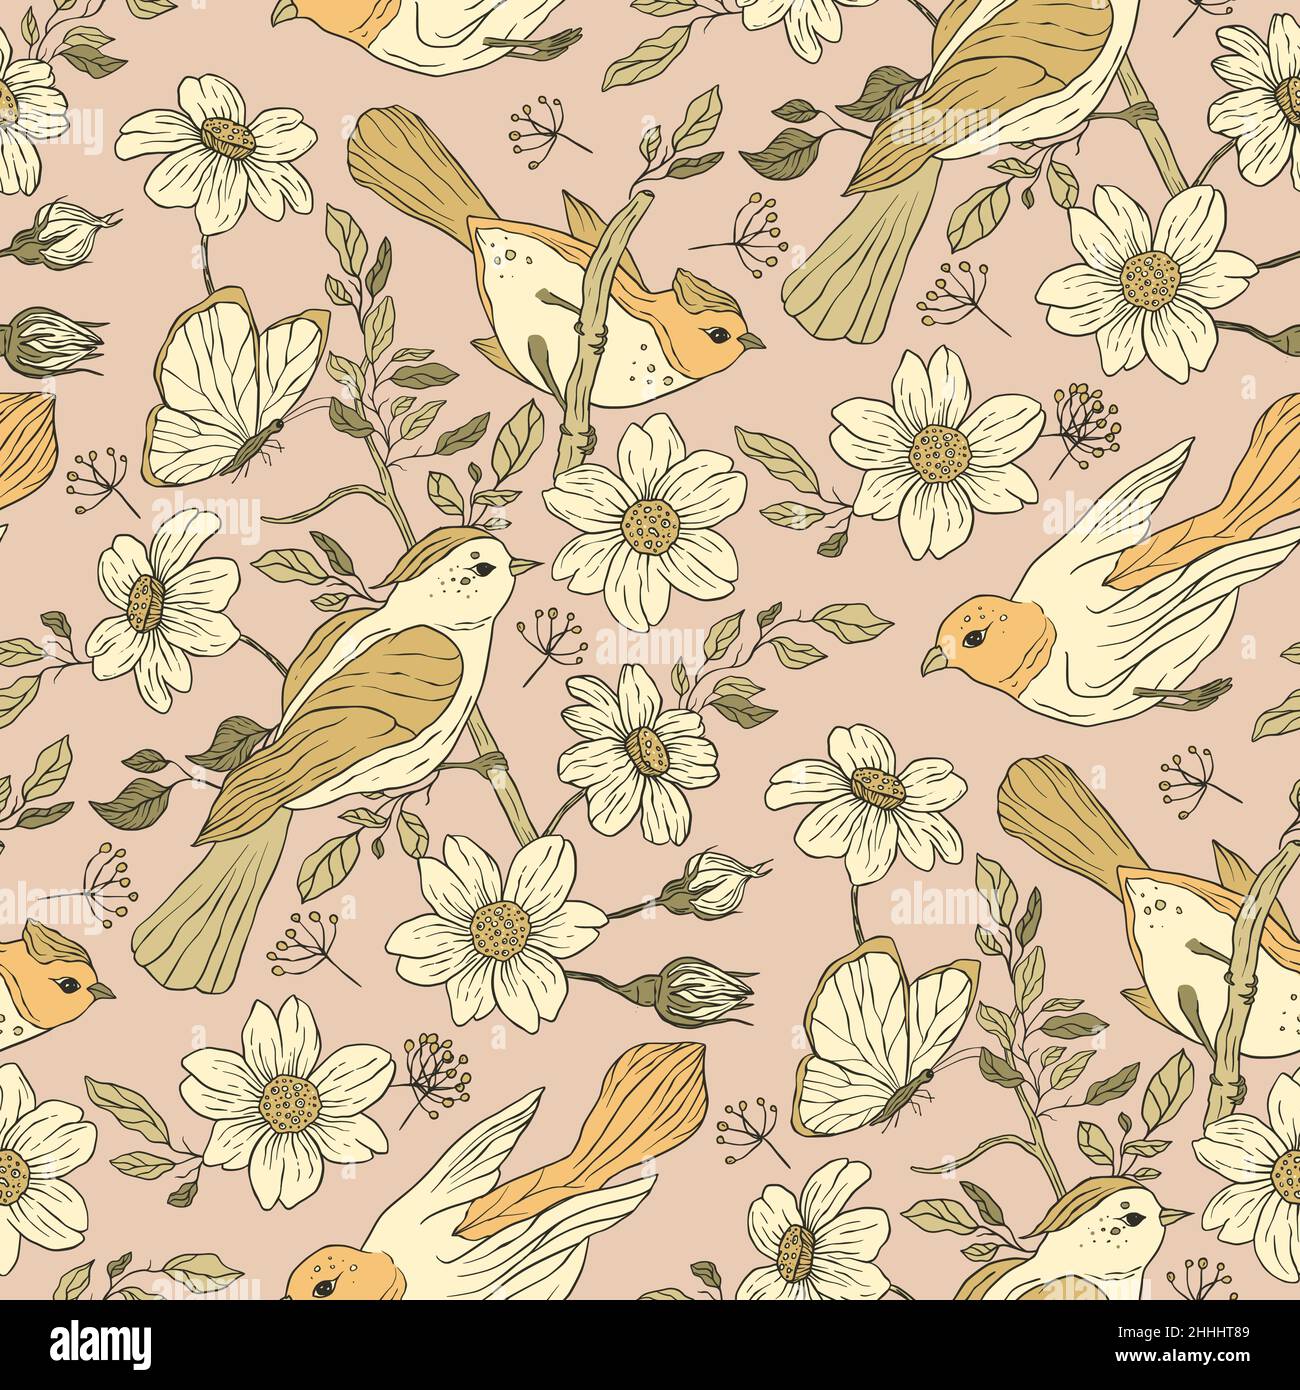 Vintage bird and butterfly boho floral seamless pattern Stock Vector